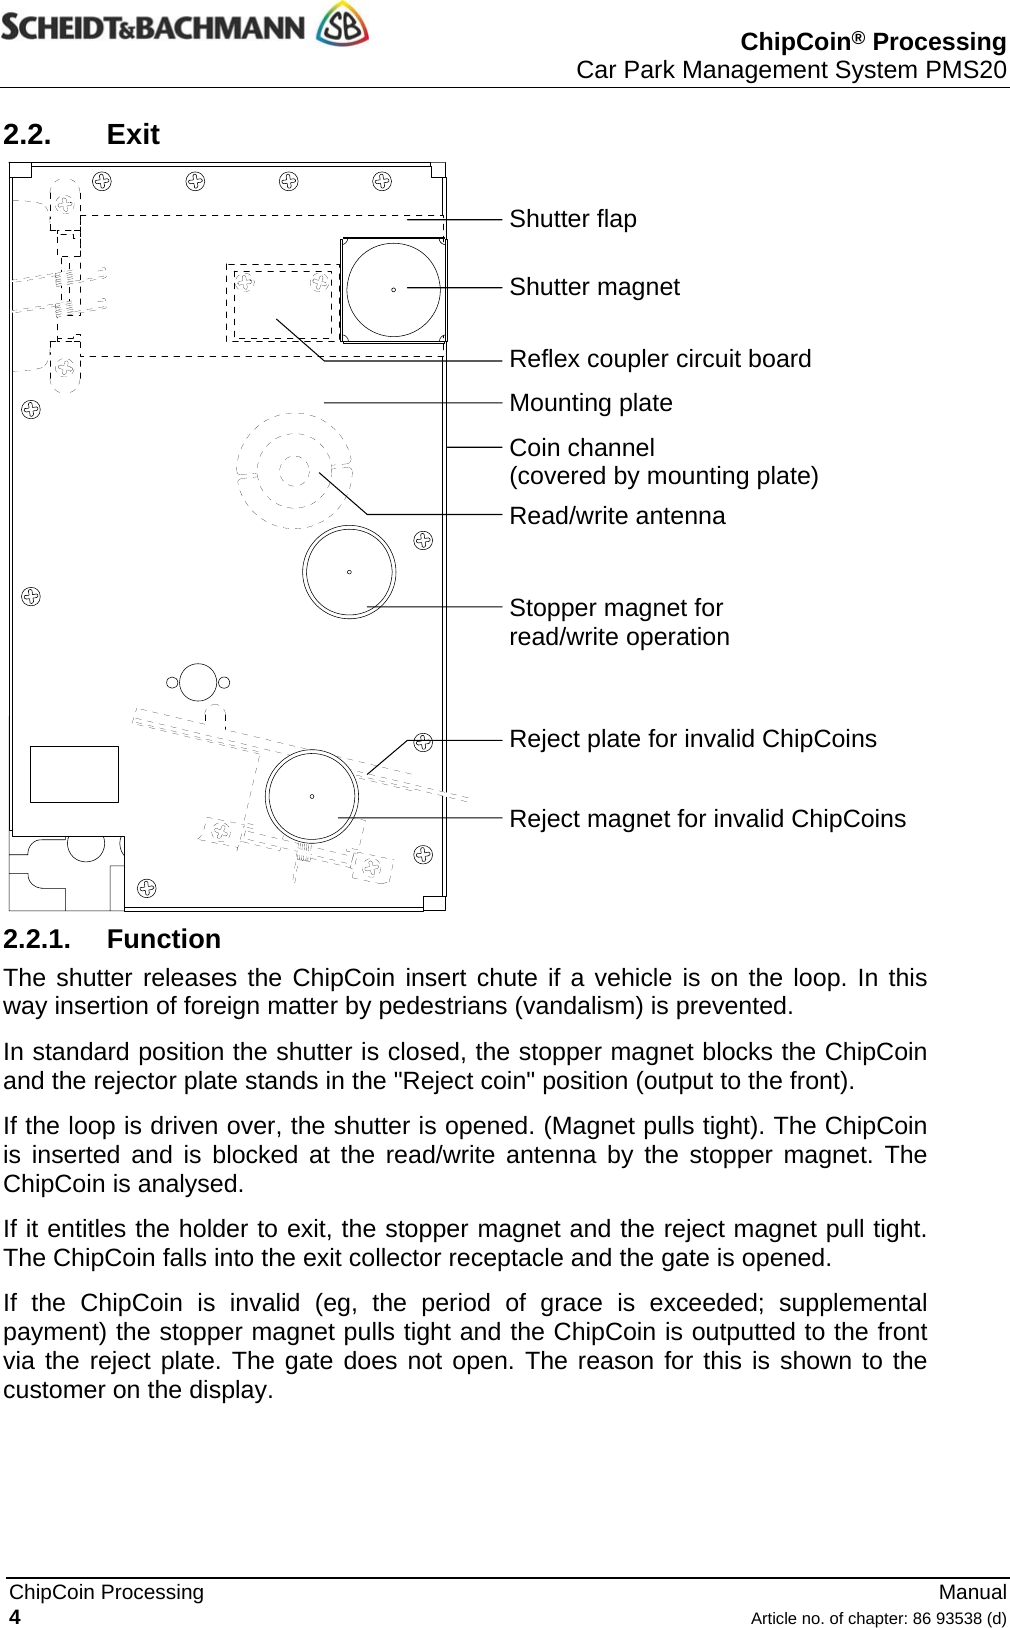  ChipCoin® Processing Car Park Management System PMS20   ChipCoin Processing   Manual 2.2. Exit 4  Article no. of chapter: 86 93538 (d) © 2004 by Scheidt &amp; Bachmann GmbH, Mönchengladbach (Germany) All rights reserverd. Subject to alterations. Some Illustrations and descriptions may also include special options.   Shutter flap Shutter magnet Reflex coupler circuit board Mounting plate Coin channel (covered by mounting plate) Read/write antenna Stopper magnet for read/write operation Reject plate for invalid ChipCoins Reject magnet for invalid ChipCoins 2.2.1. Function The shutter releases the ChipCoin insert chute if a vehicle is on the loop. In this way insertion of foreign matter by pedestrians (vandalism) is prevented. In standard position the shutter is closed, the stopper magnet blocks the ChipCoin and the rejector plate stands in the &quot;Reject coin&quot; position (output to the front). If the loop is driven over, the shutter is opened. (Magnet pulls tight). The ChipCoin is inserted and is blocked at the read/write antenna by the stopper magnet. The ChipCoin is analysed. If it entitles the holder to exit, the stopper magnet and the reject magnet pull tight. The ChipCoin falls into the exit collector receptacle and the gate is opened. If the ChipCoin is invalid (eg, the period of grace is exceeded; supplemental payment) the stopper magnet pulls tight and the ChipCoin is outputted to the front via the reject plate. The gate does not open. The reason for this is shown to the customer on the display. 